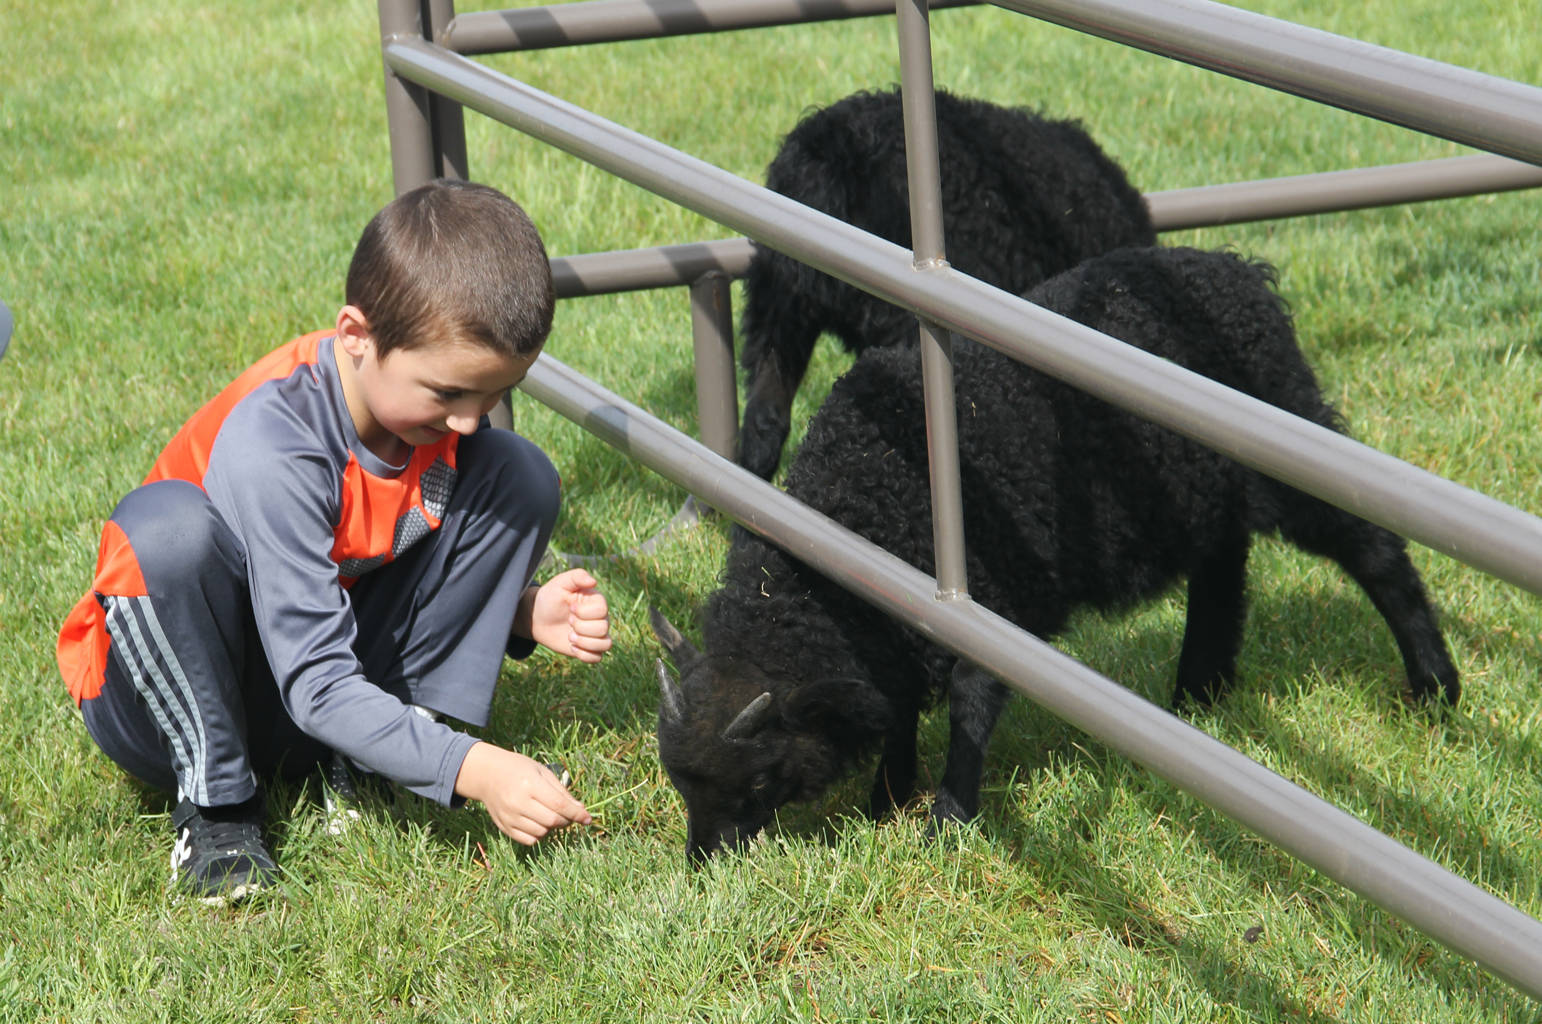 Baby goats lure kids to Matti’s Farm booth at River Festival.